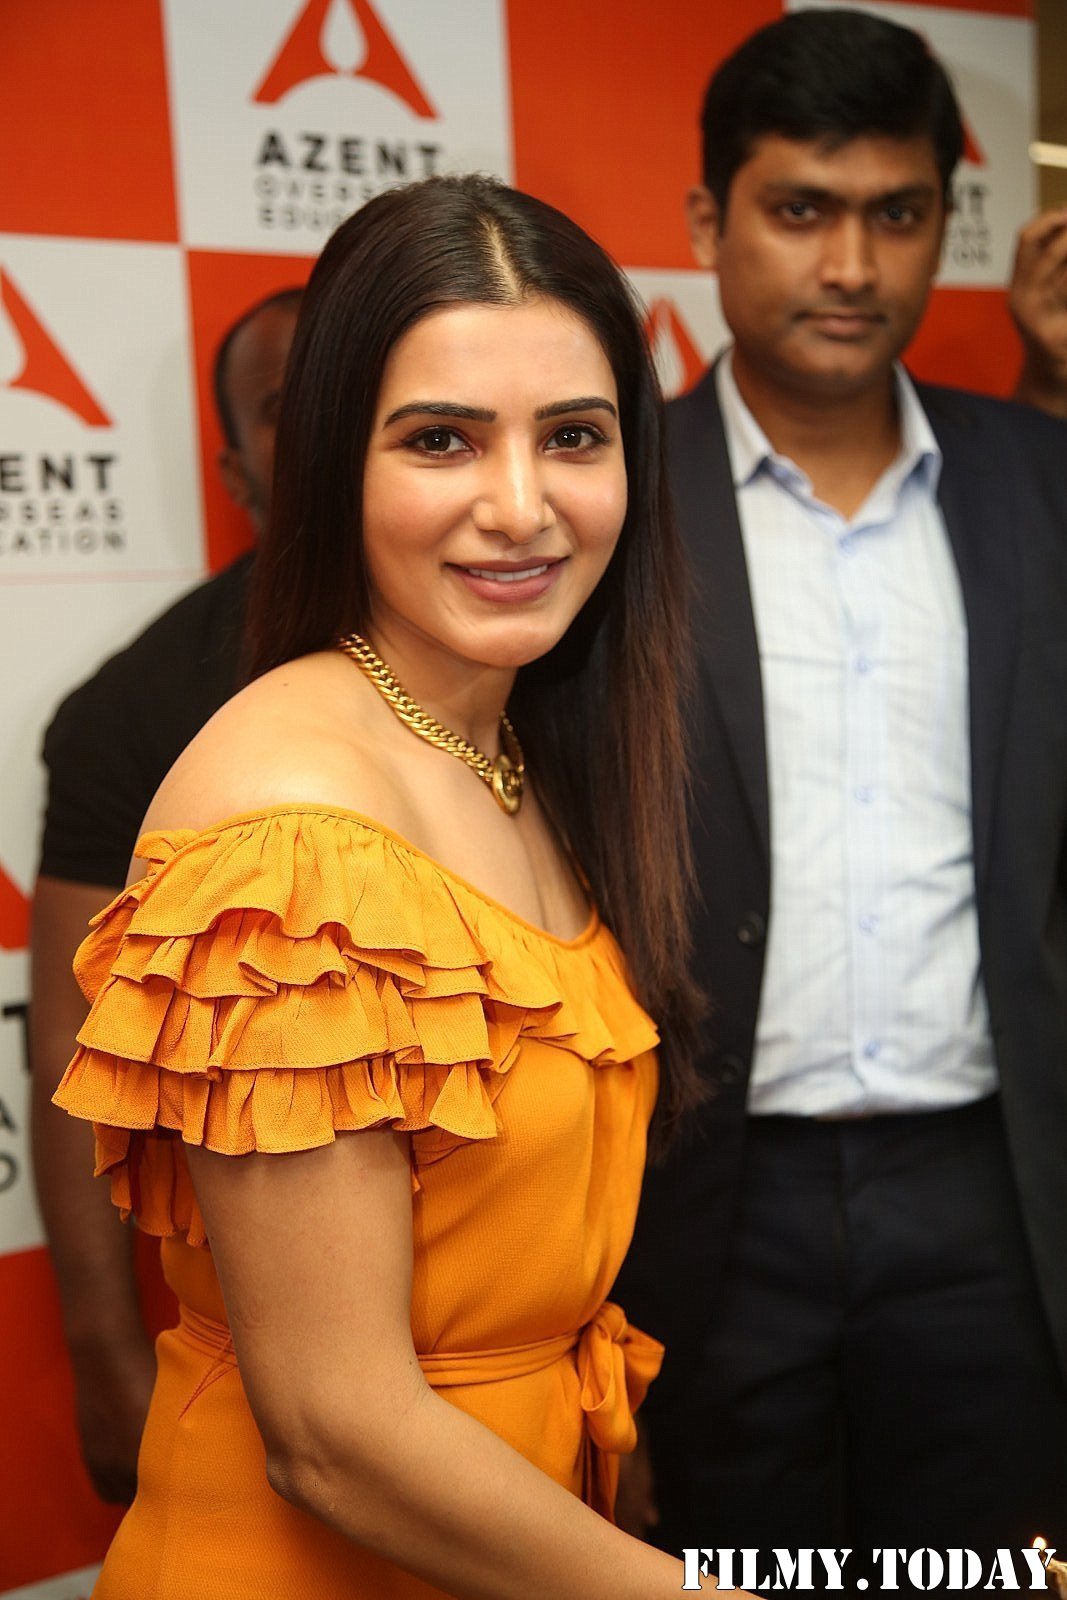 Samantha Ruth Prabhu - AZENT Overseas Education Hyderbad Center Launch Photos | Picture 1682671